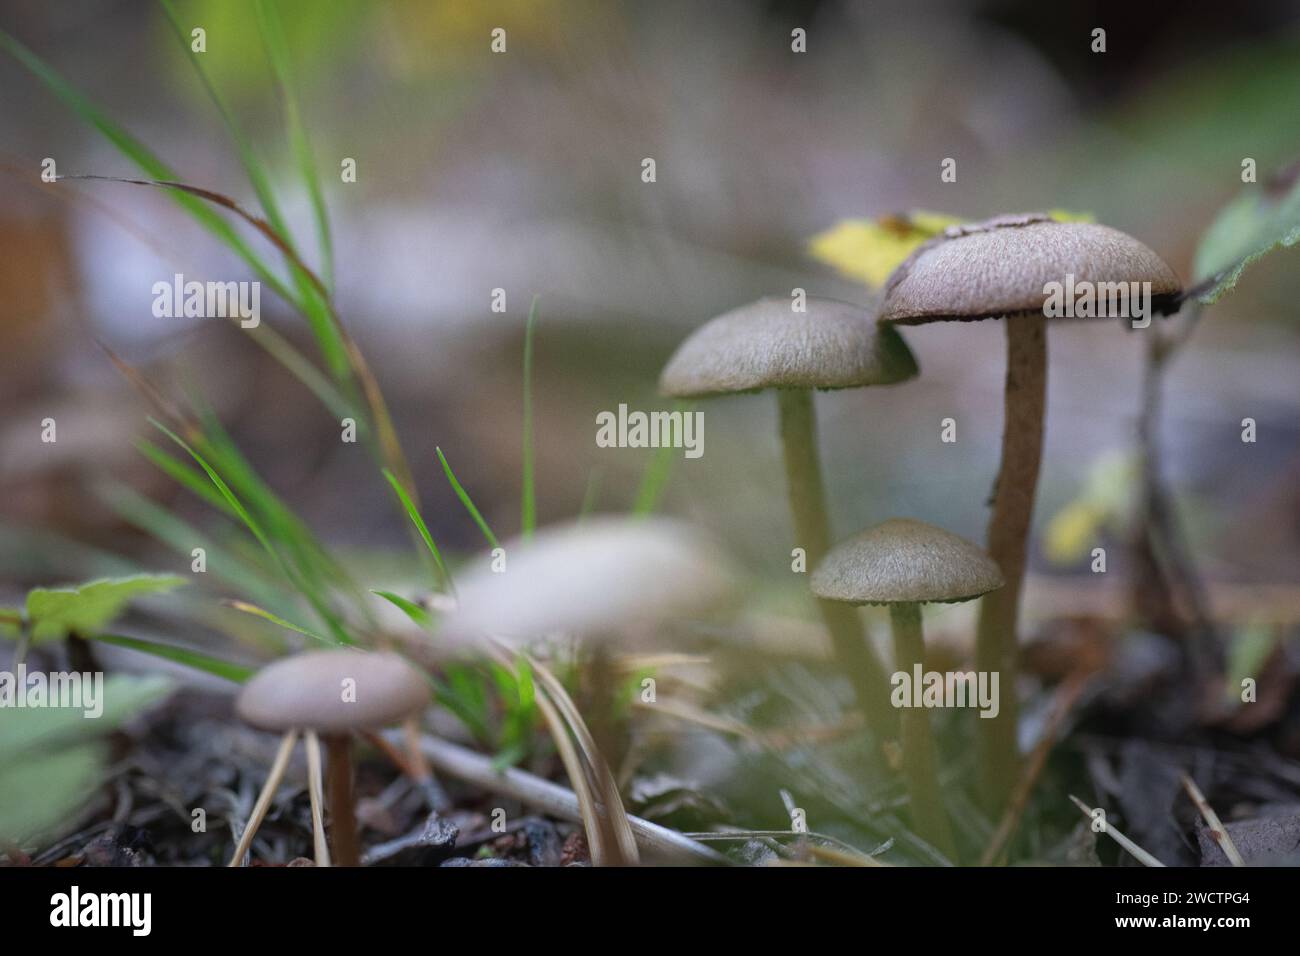 Wild mushrooms growing in a Finnish forest during autumn time. Stock Photo